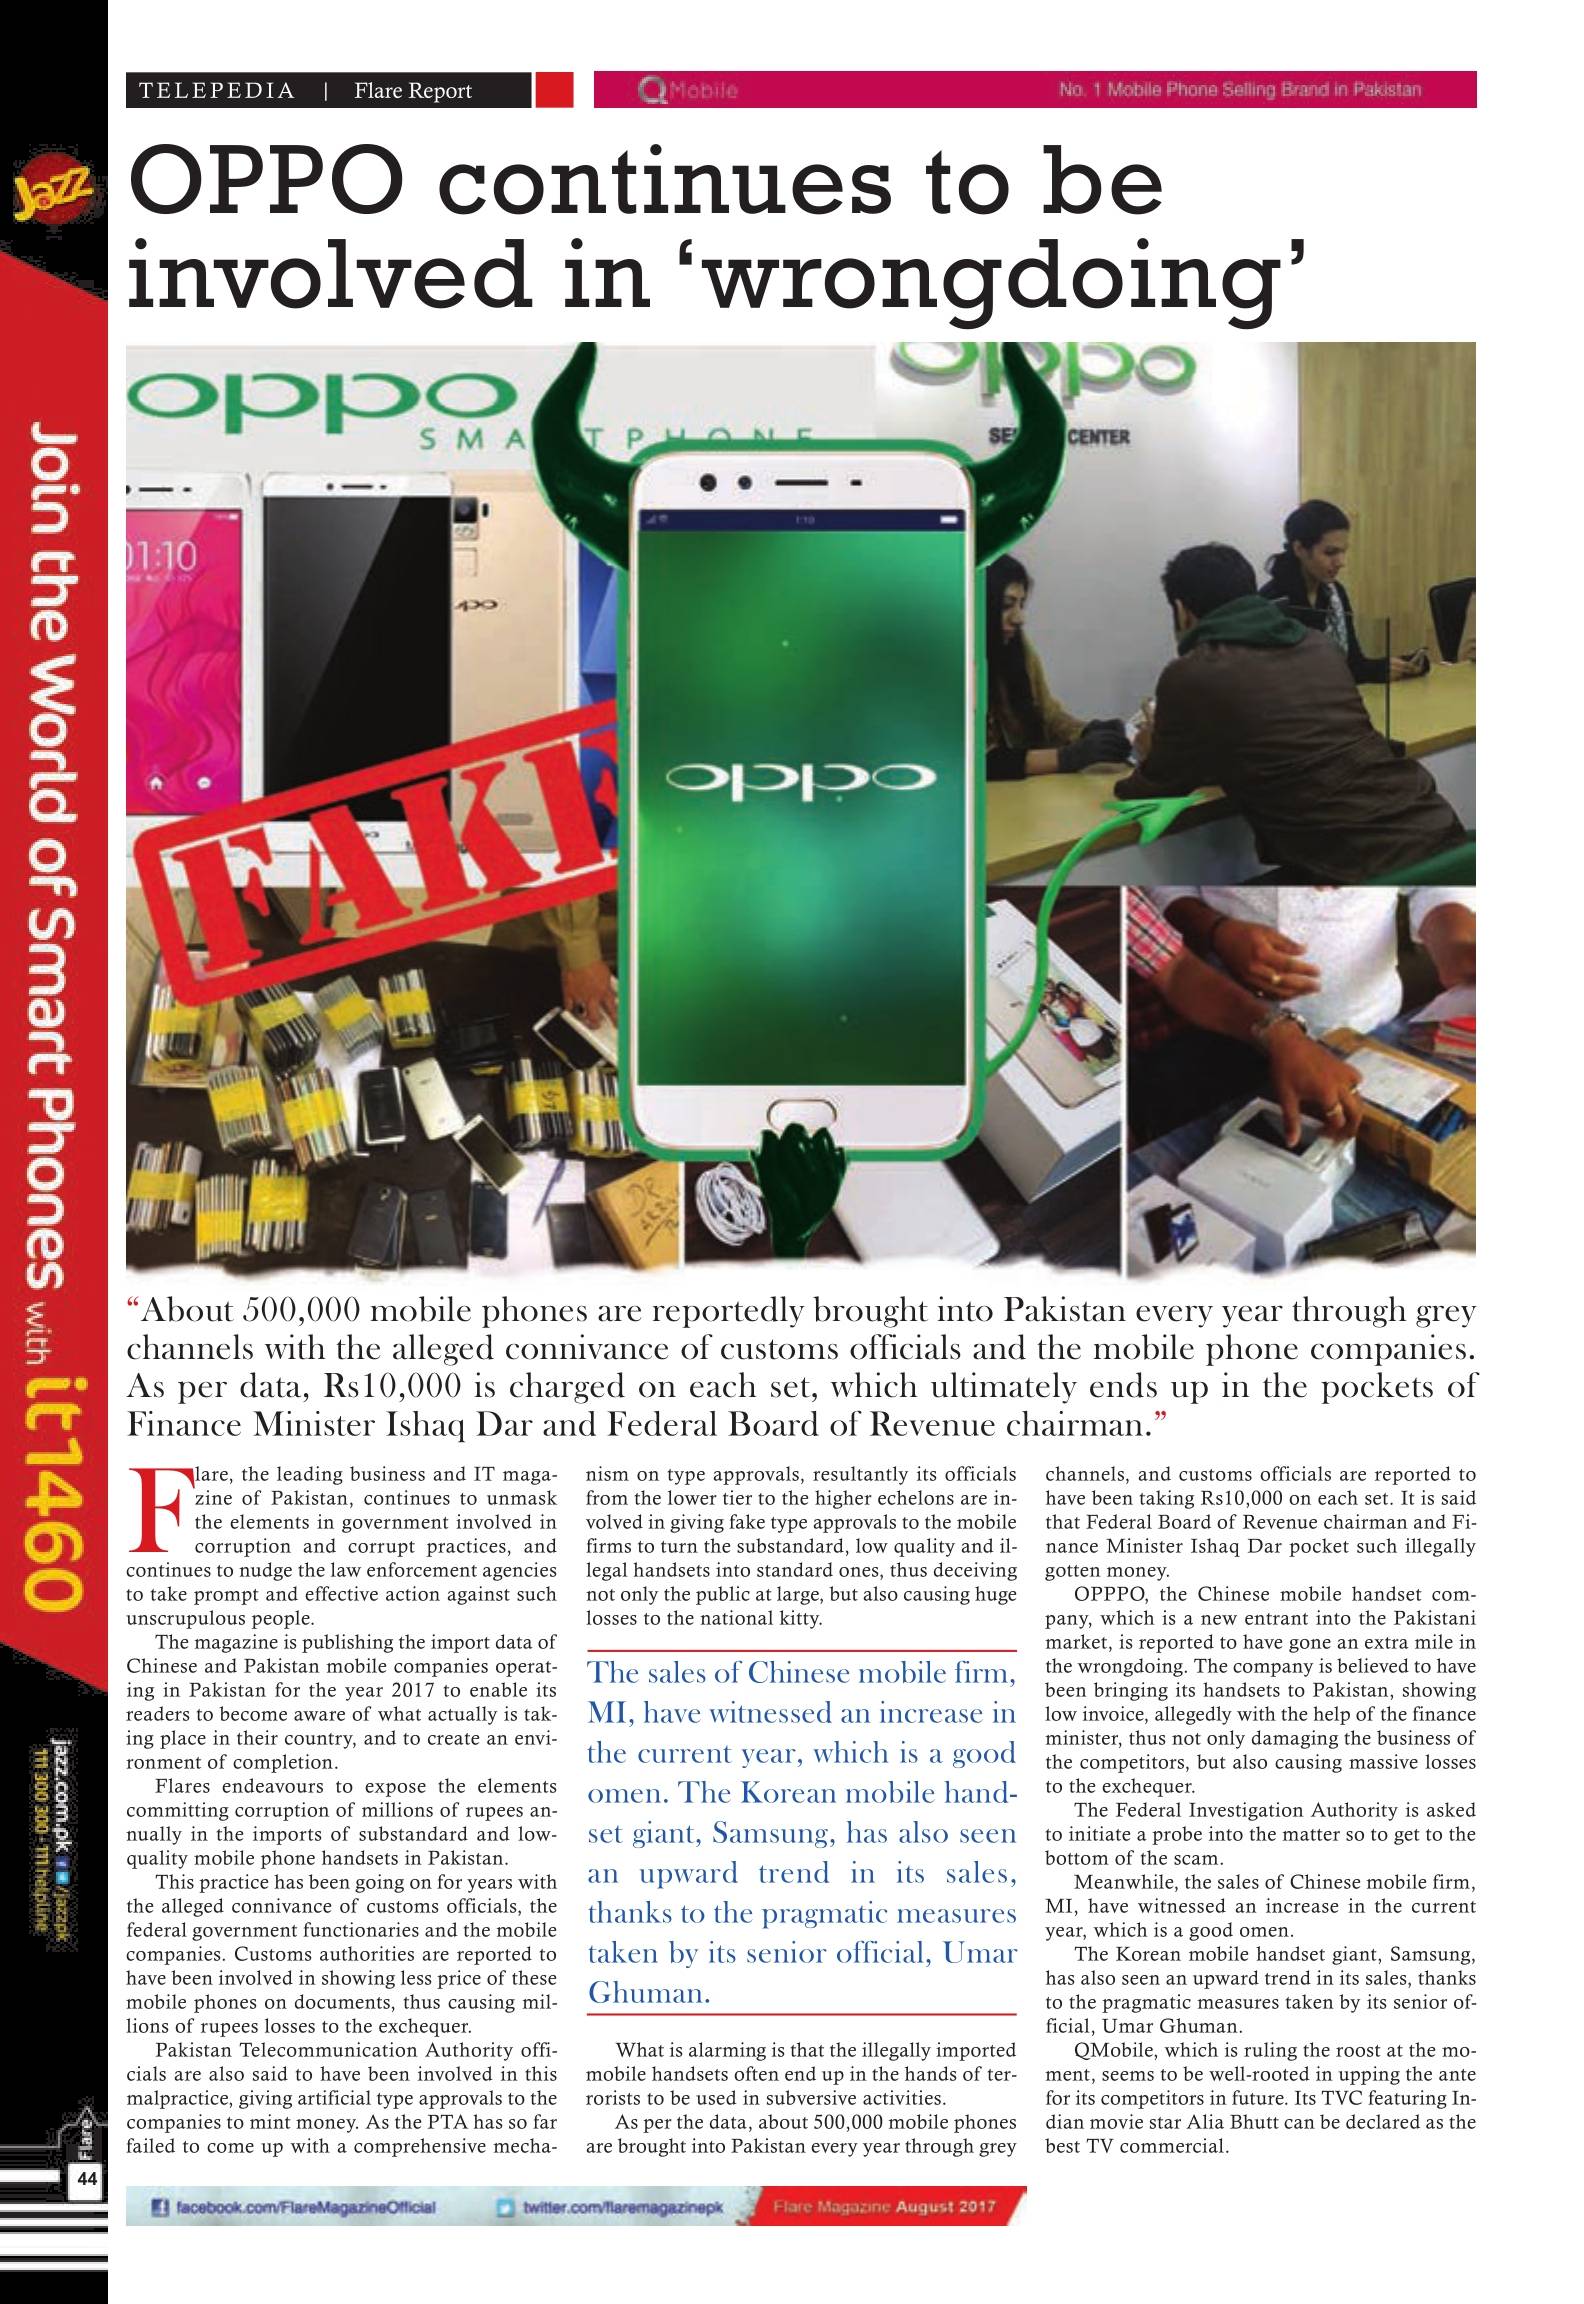 OPPO continues to be involved in wrong doing